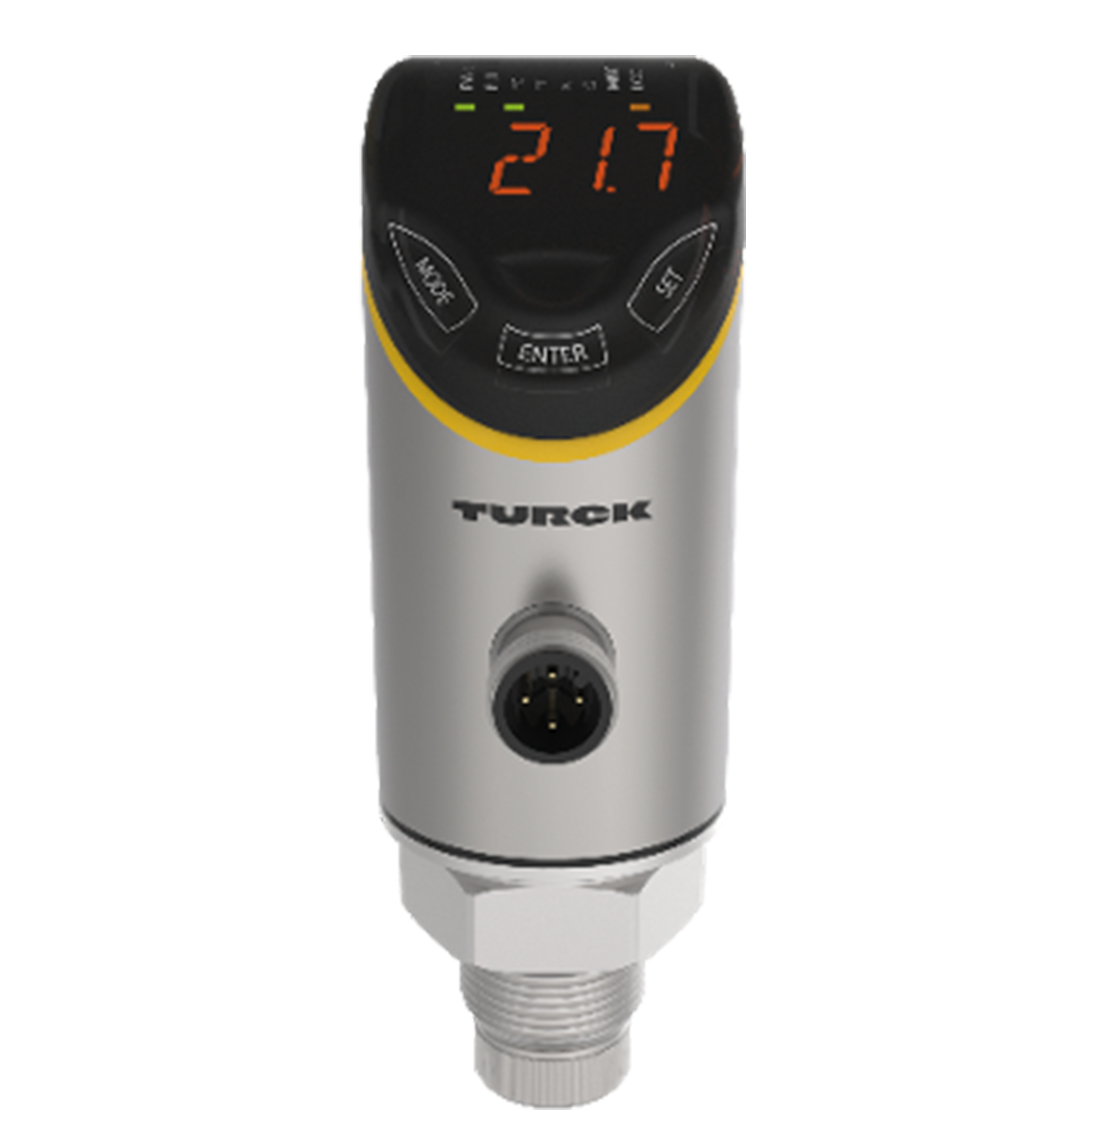 Ensure Critical Temperature Control in a Variety of Media with the TS+ Sensor